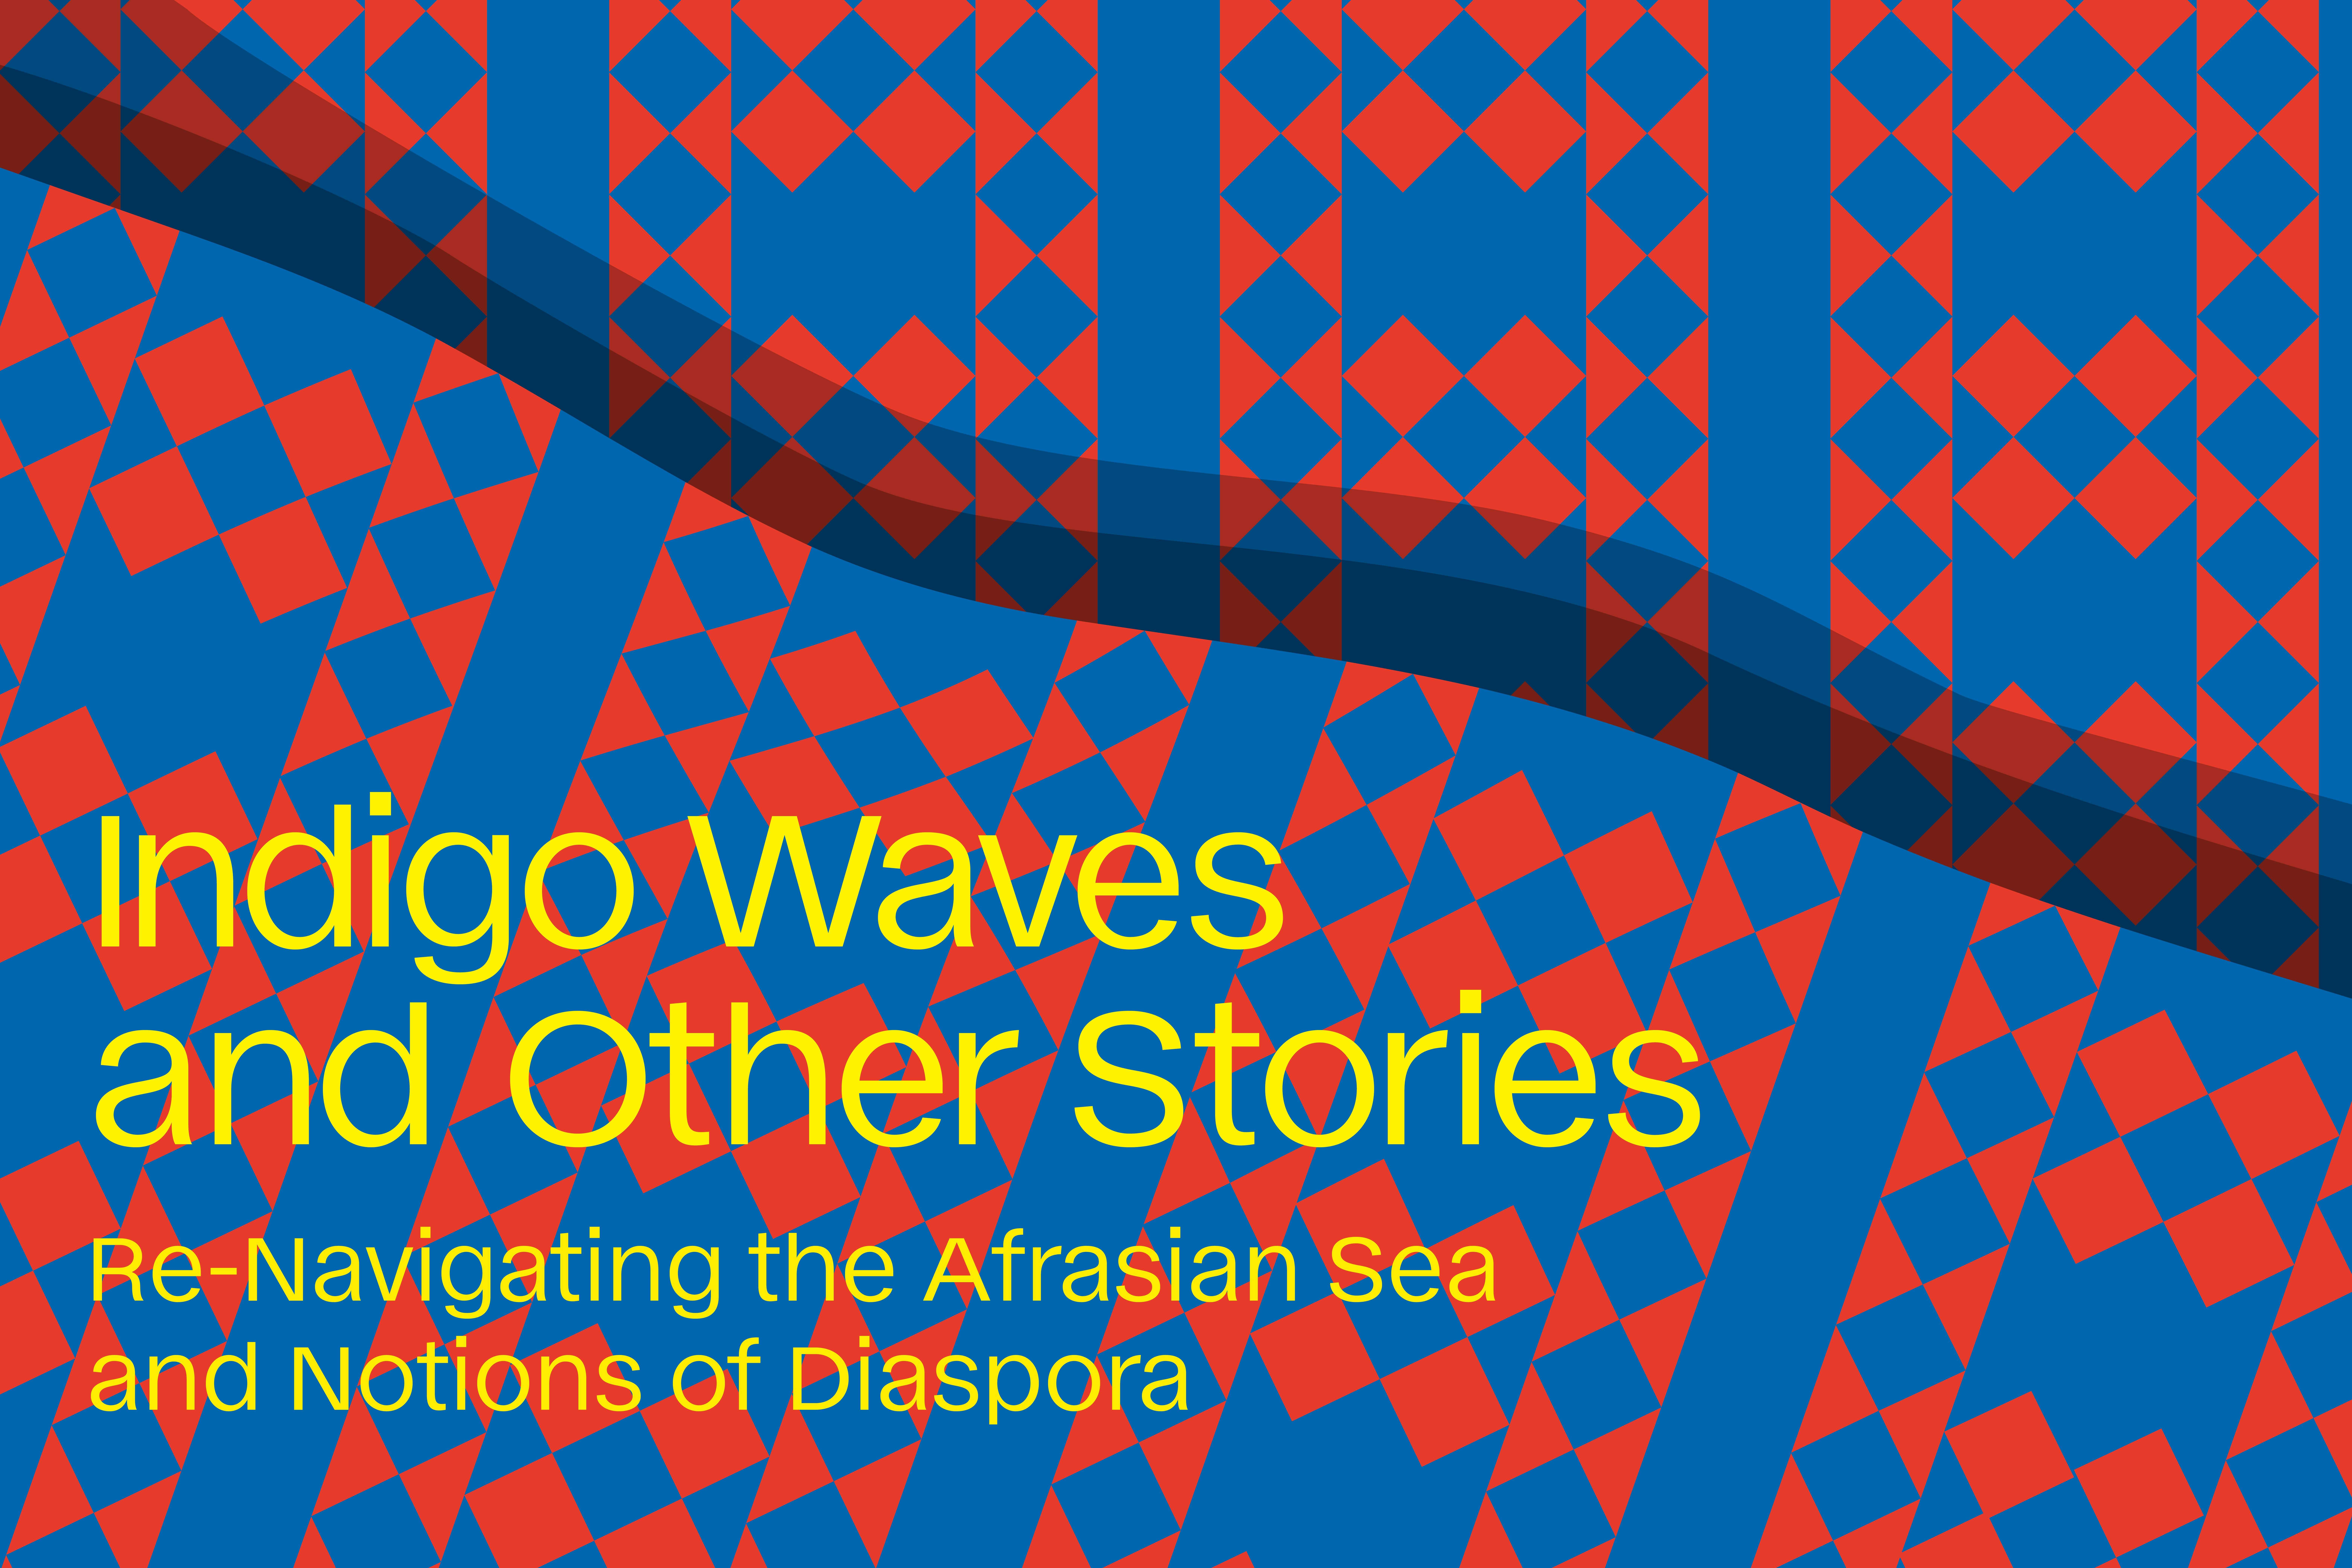 Indigo Waves and Other Stories: Re-Navigating the Afrasian Sea and Notions of Diaspora.